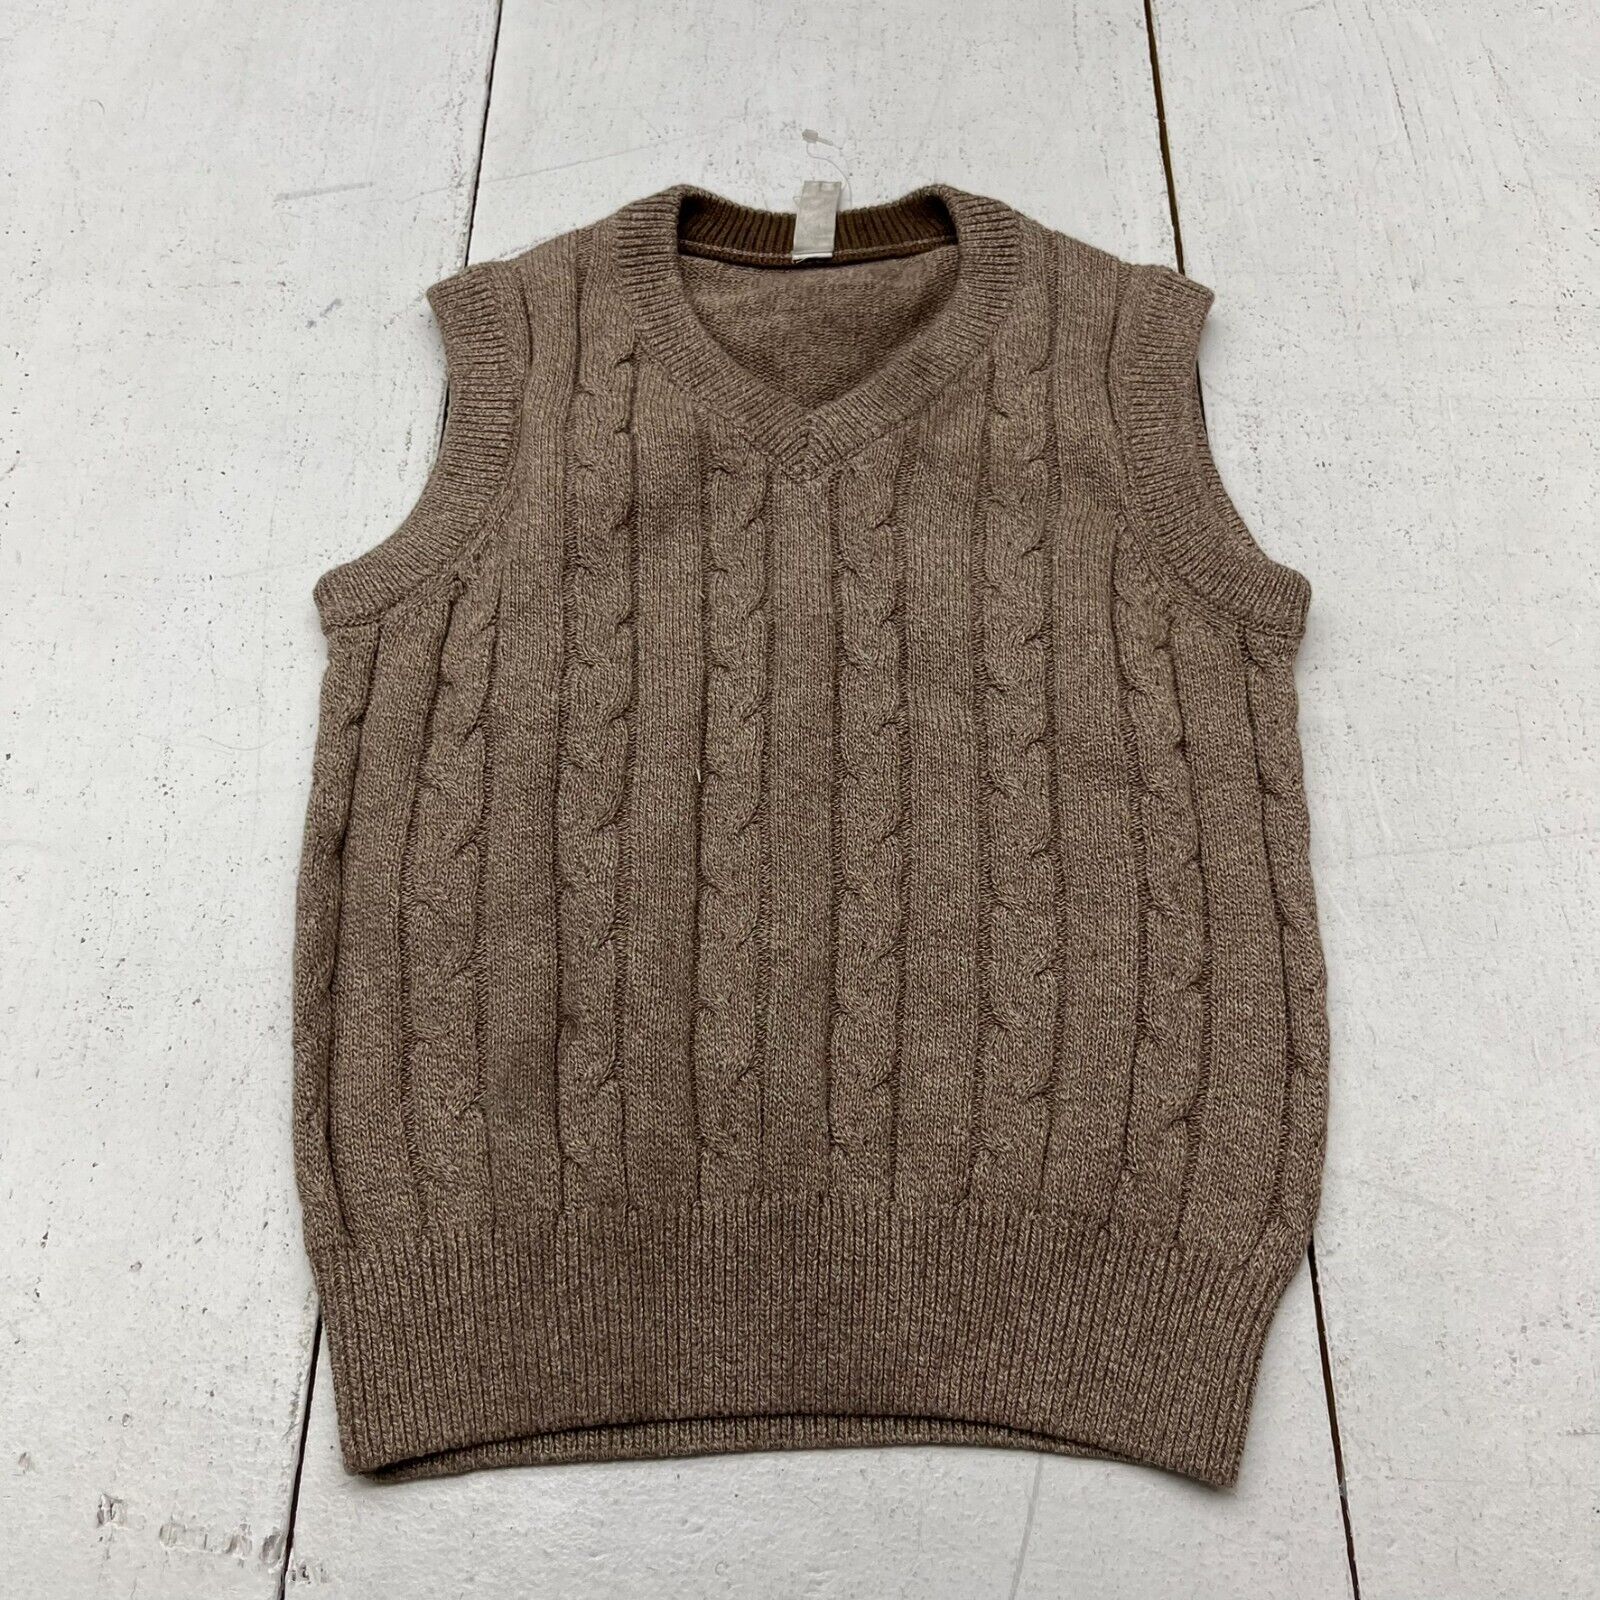 Boboyoyo Brown Cable Knit Sweater Vest Boys Size Small NEW